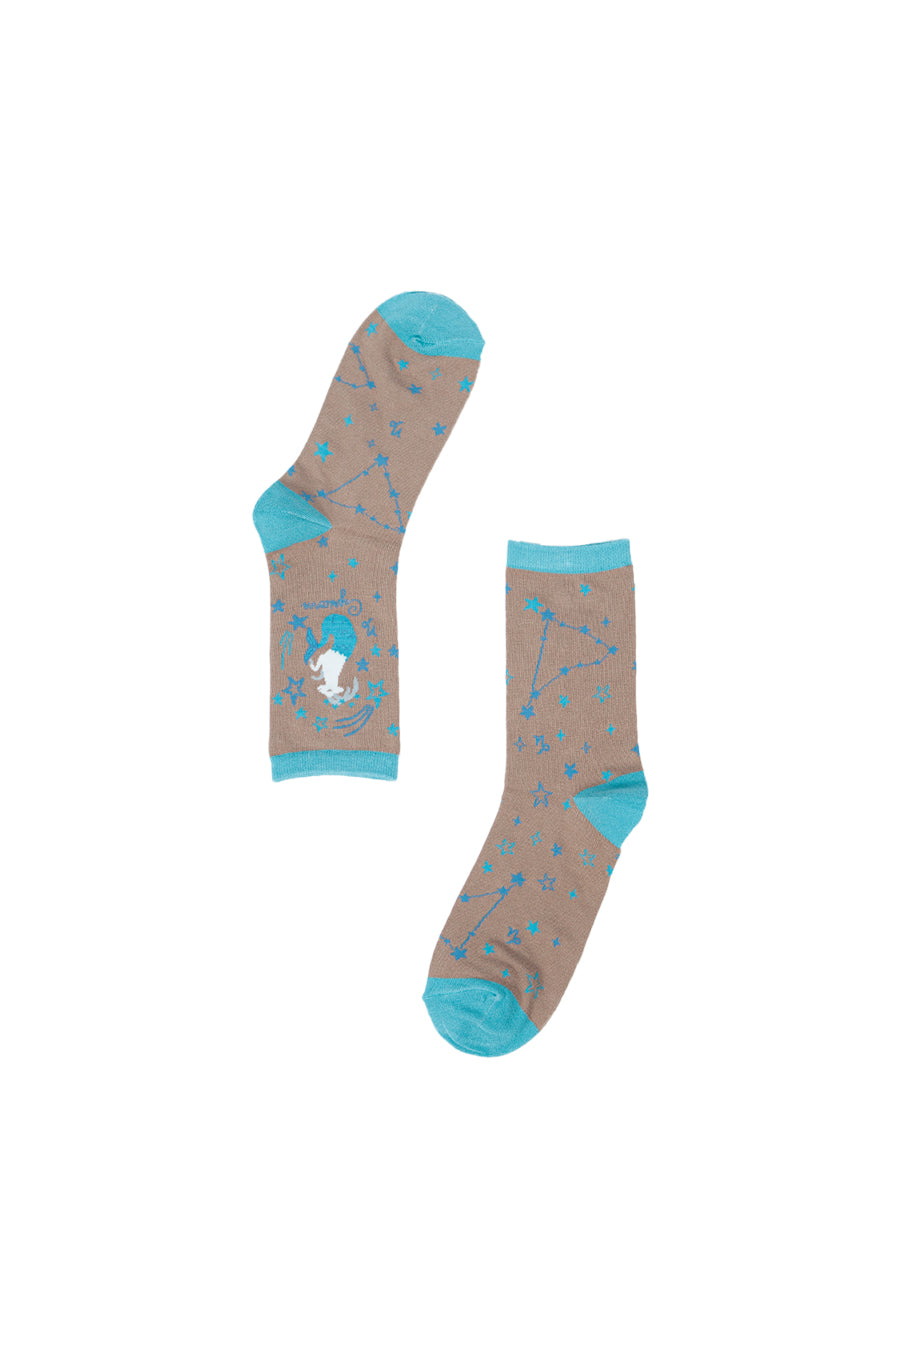 showing the constellation of capricorn on the bamboo socks